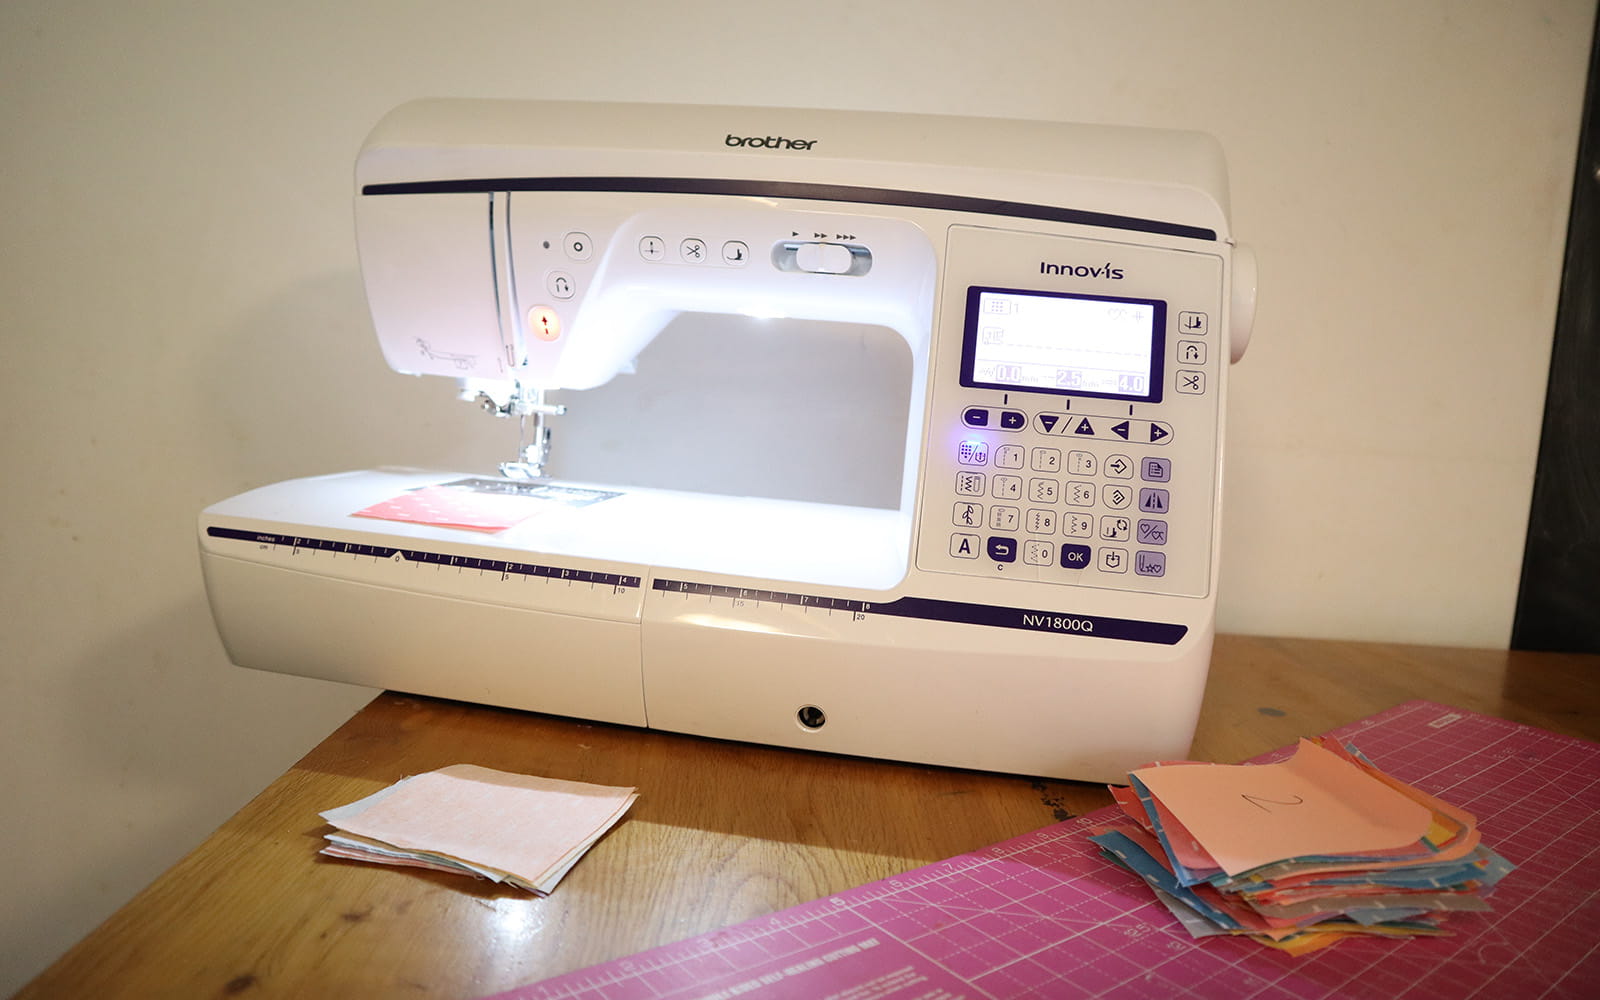 Brother NV1800Q sewing machine on table with square fabric stack